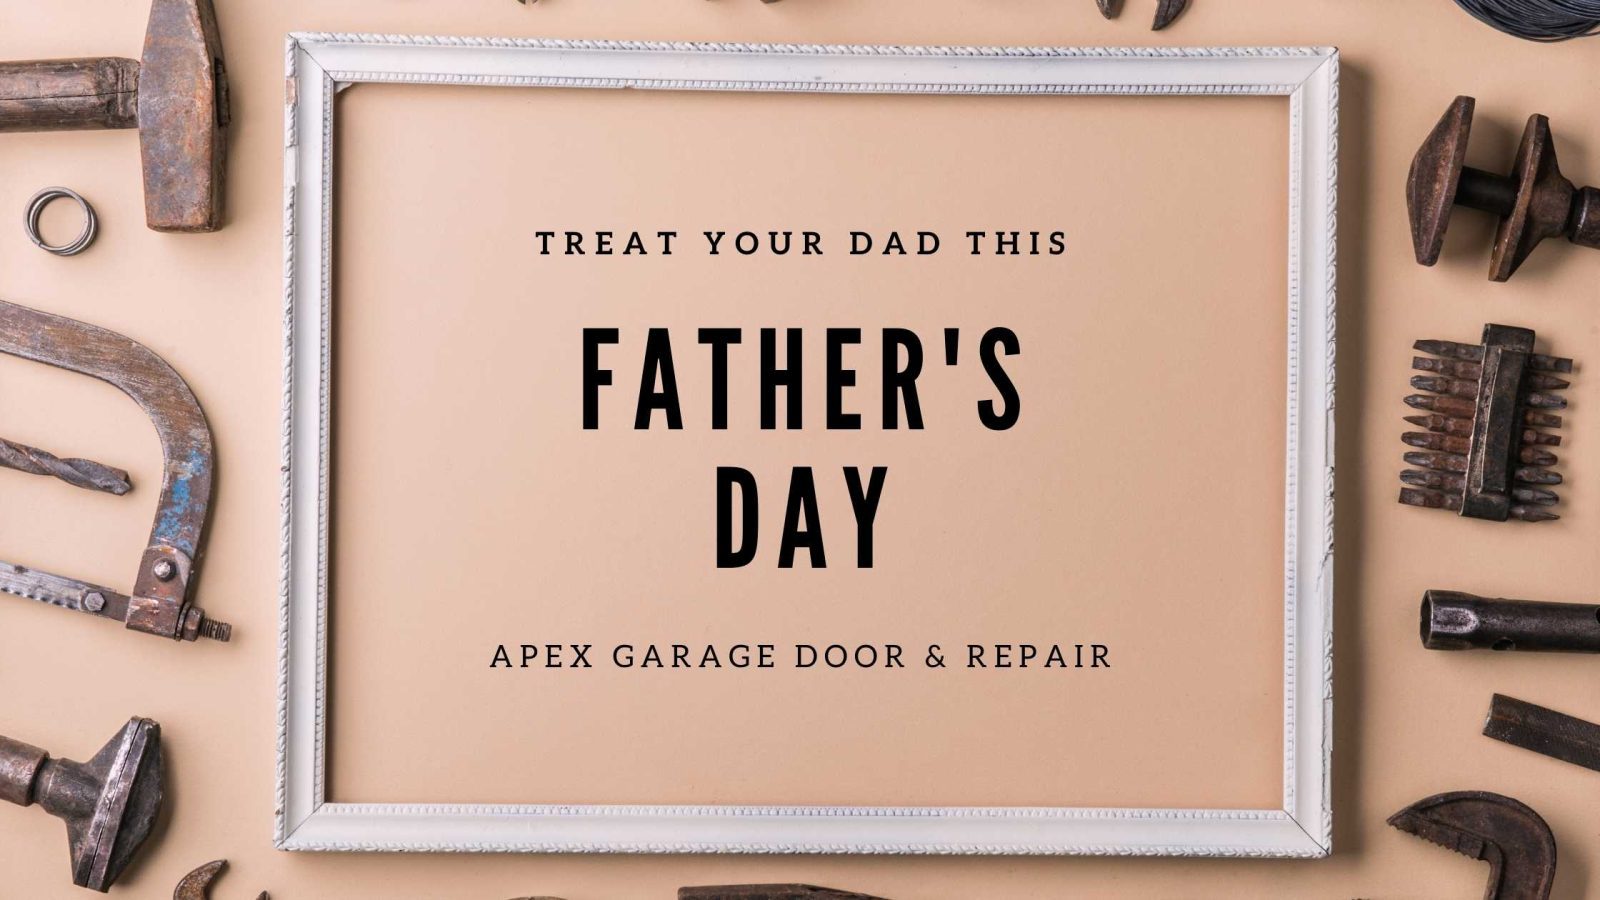 Treat Your Dad This Father’s Day